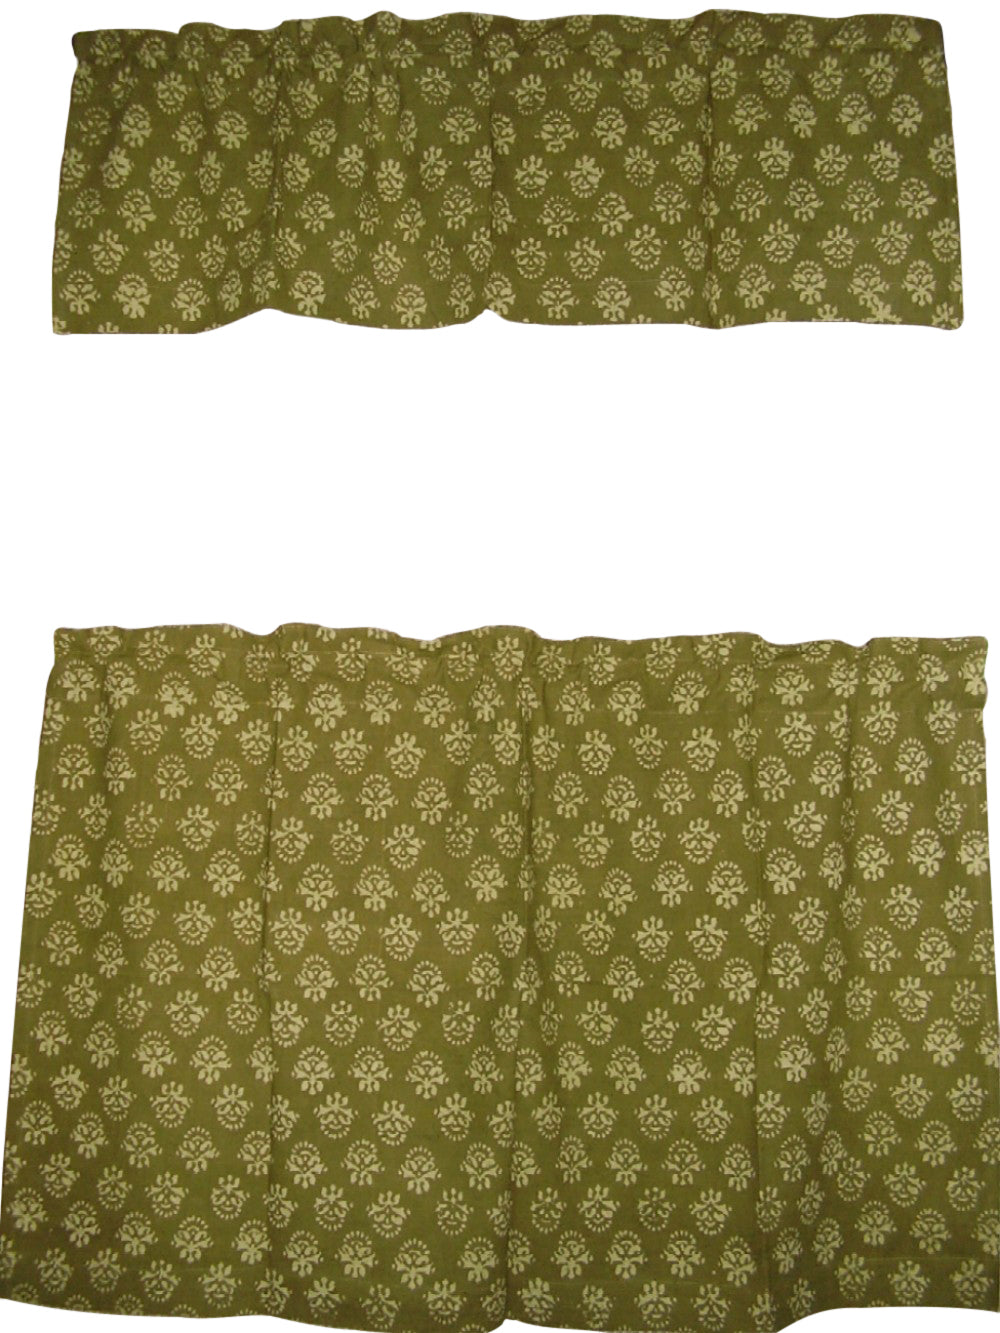 Cafe Curtain with Valance Block Print Cotton 44" x 30" Olive Green 